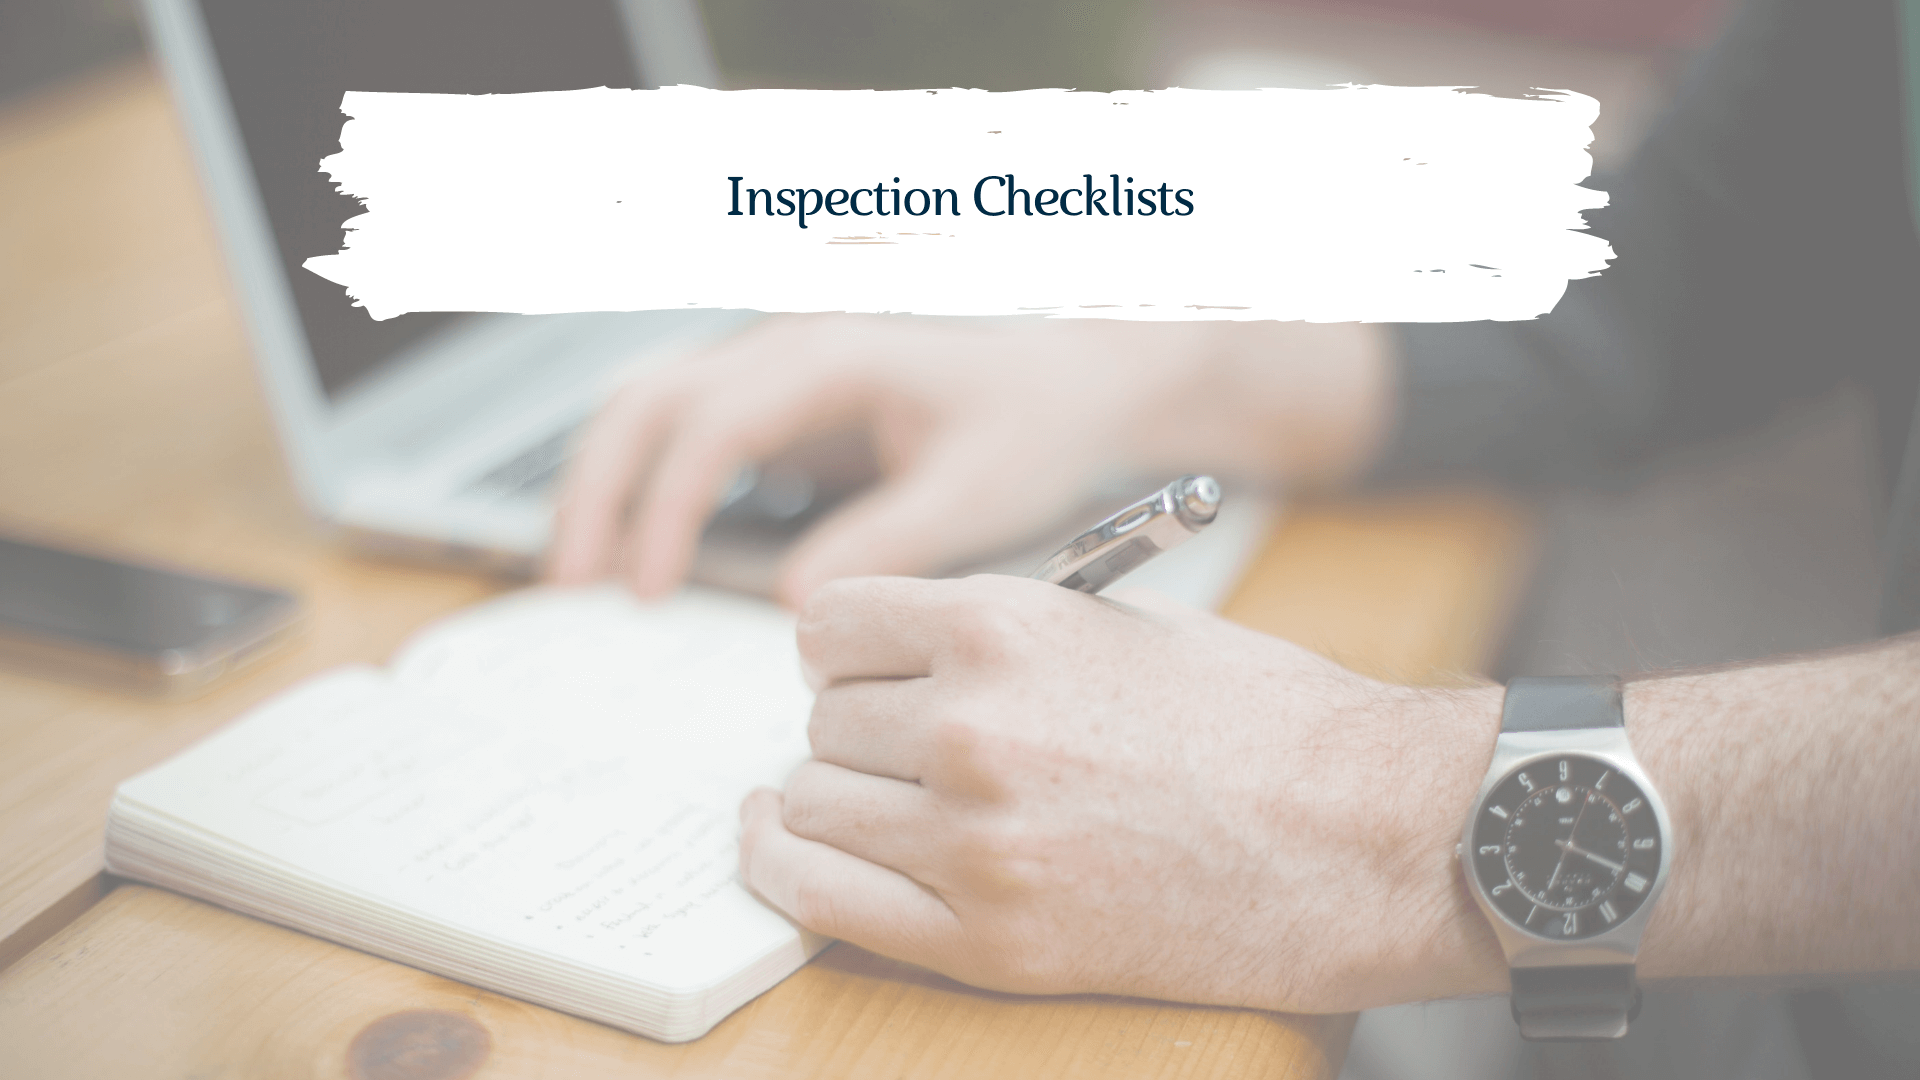 A Guide for Golden Landlords on Move-in and Move-out Inspection Checklists